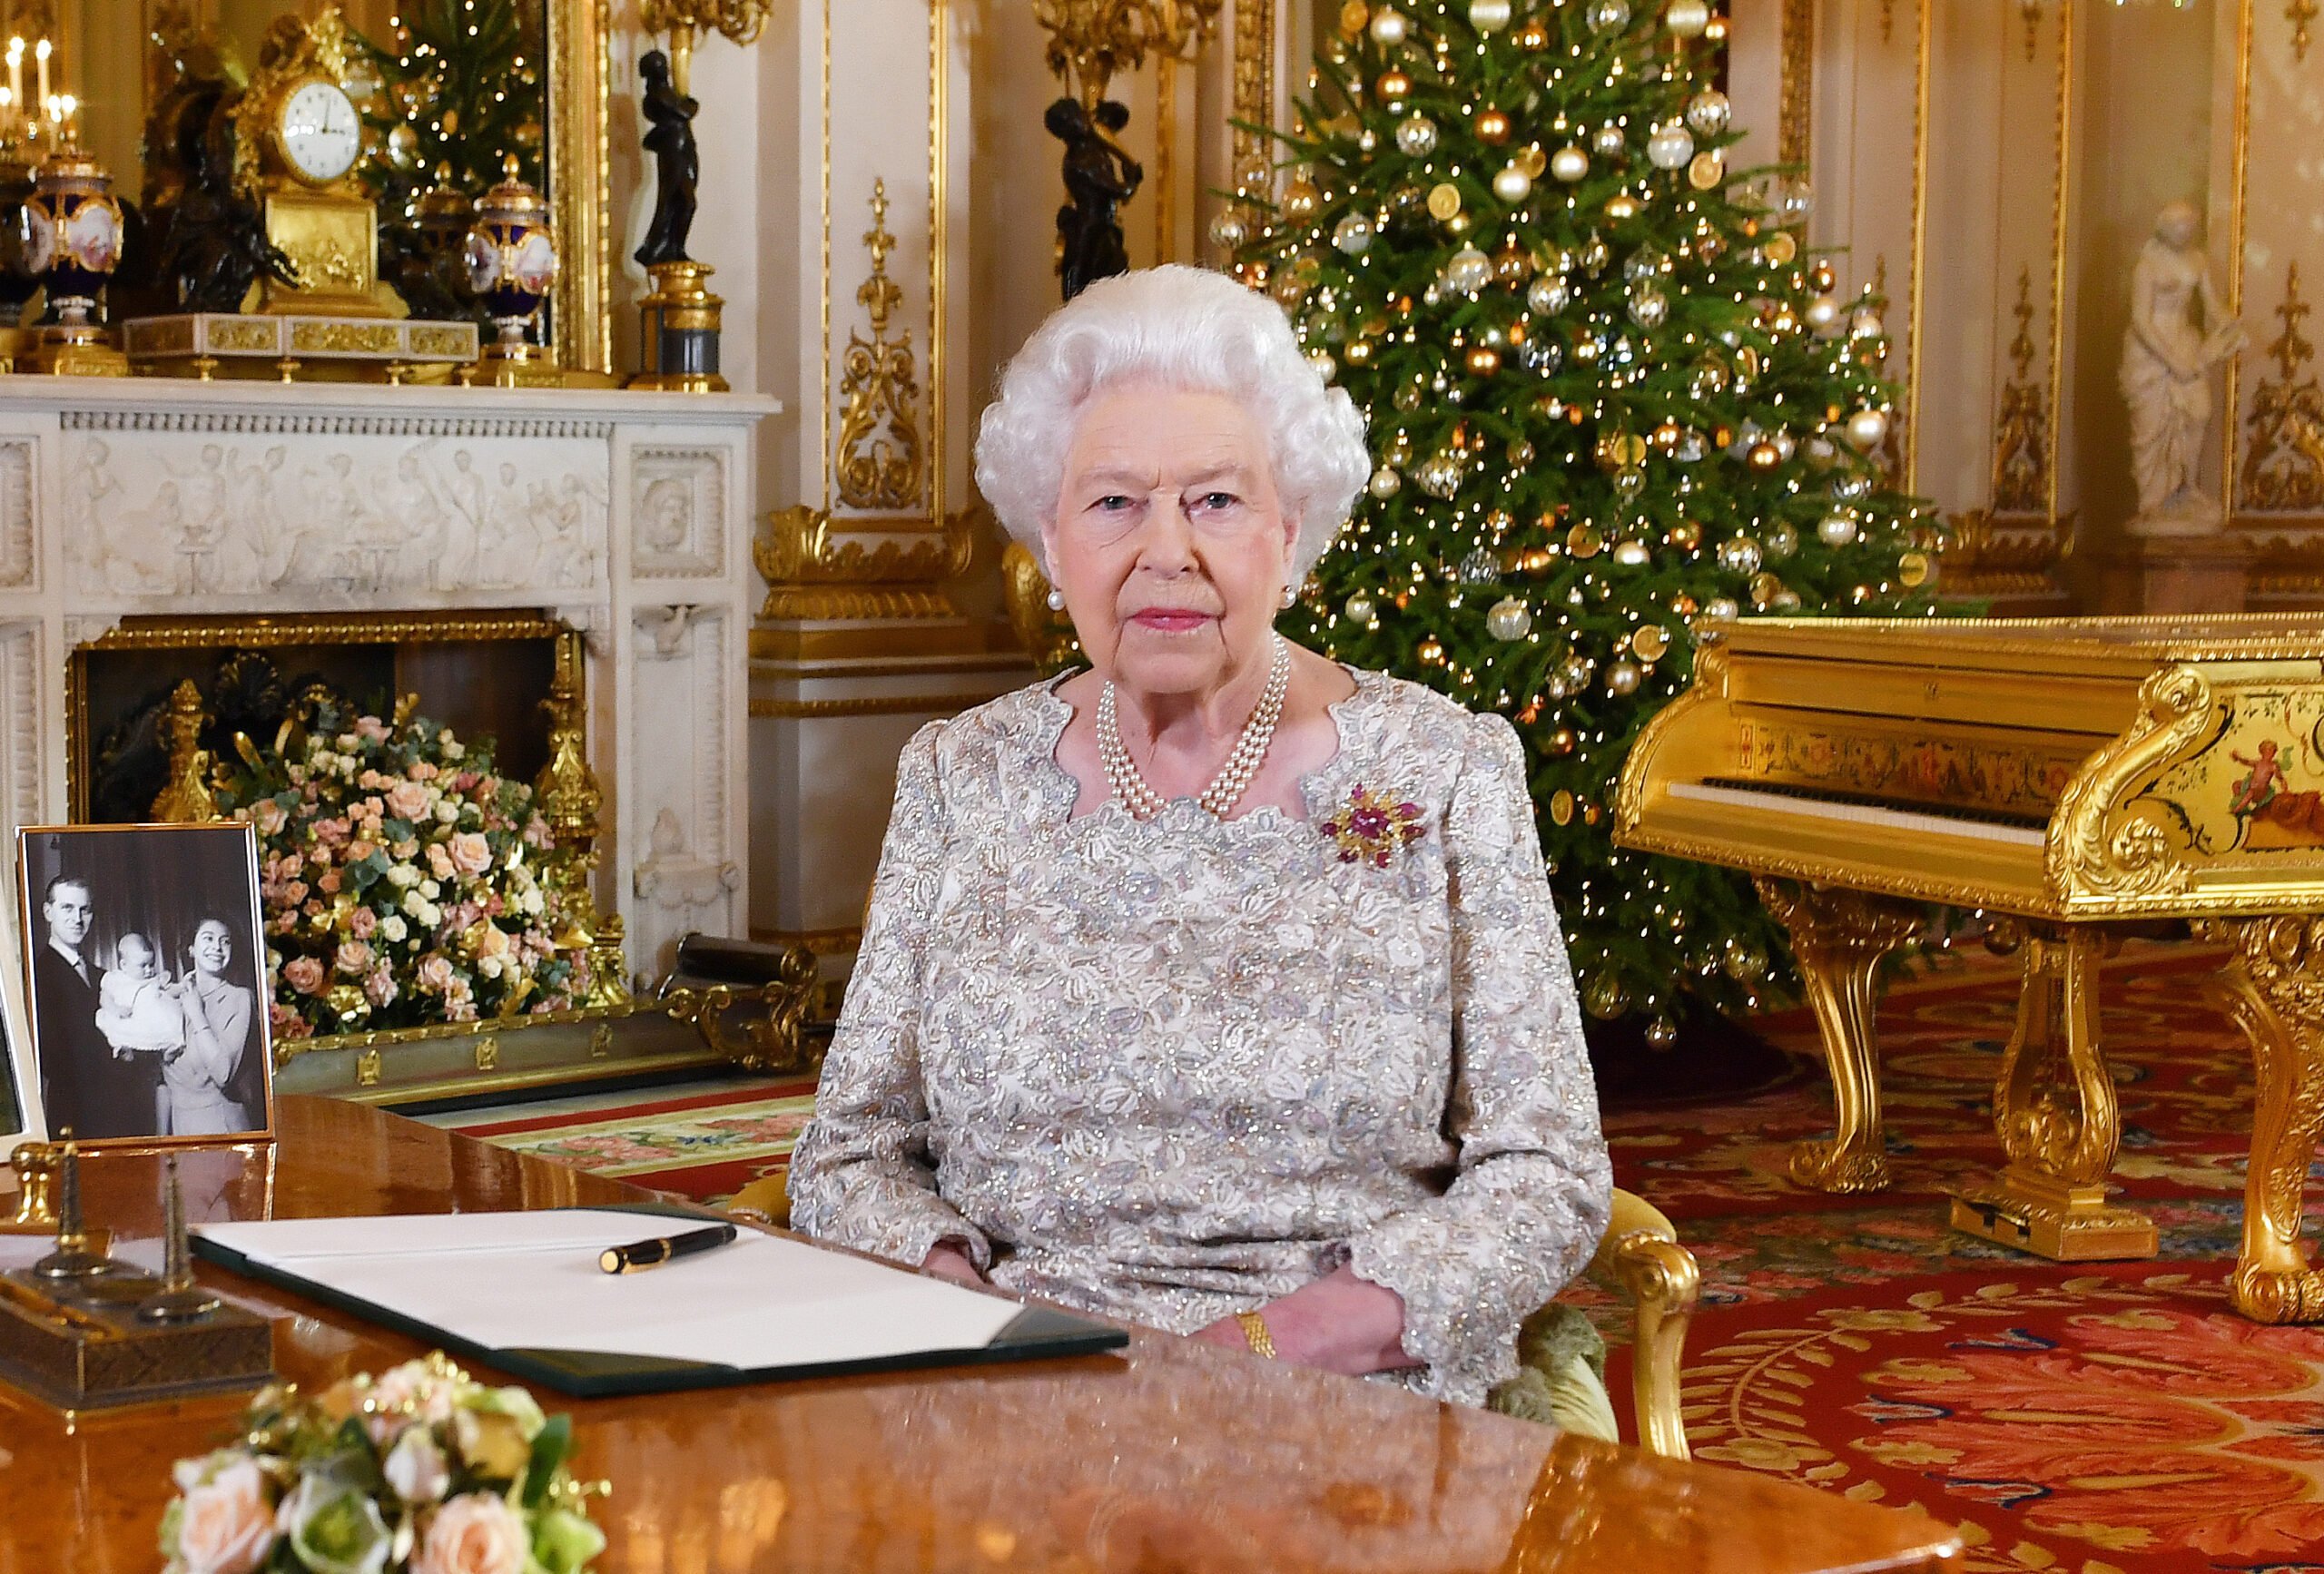 The Truth Behind The Royal Family’s Weight Before and After Christmas Dinner